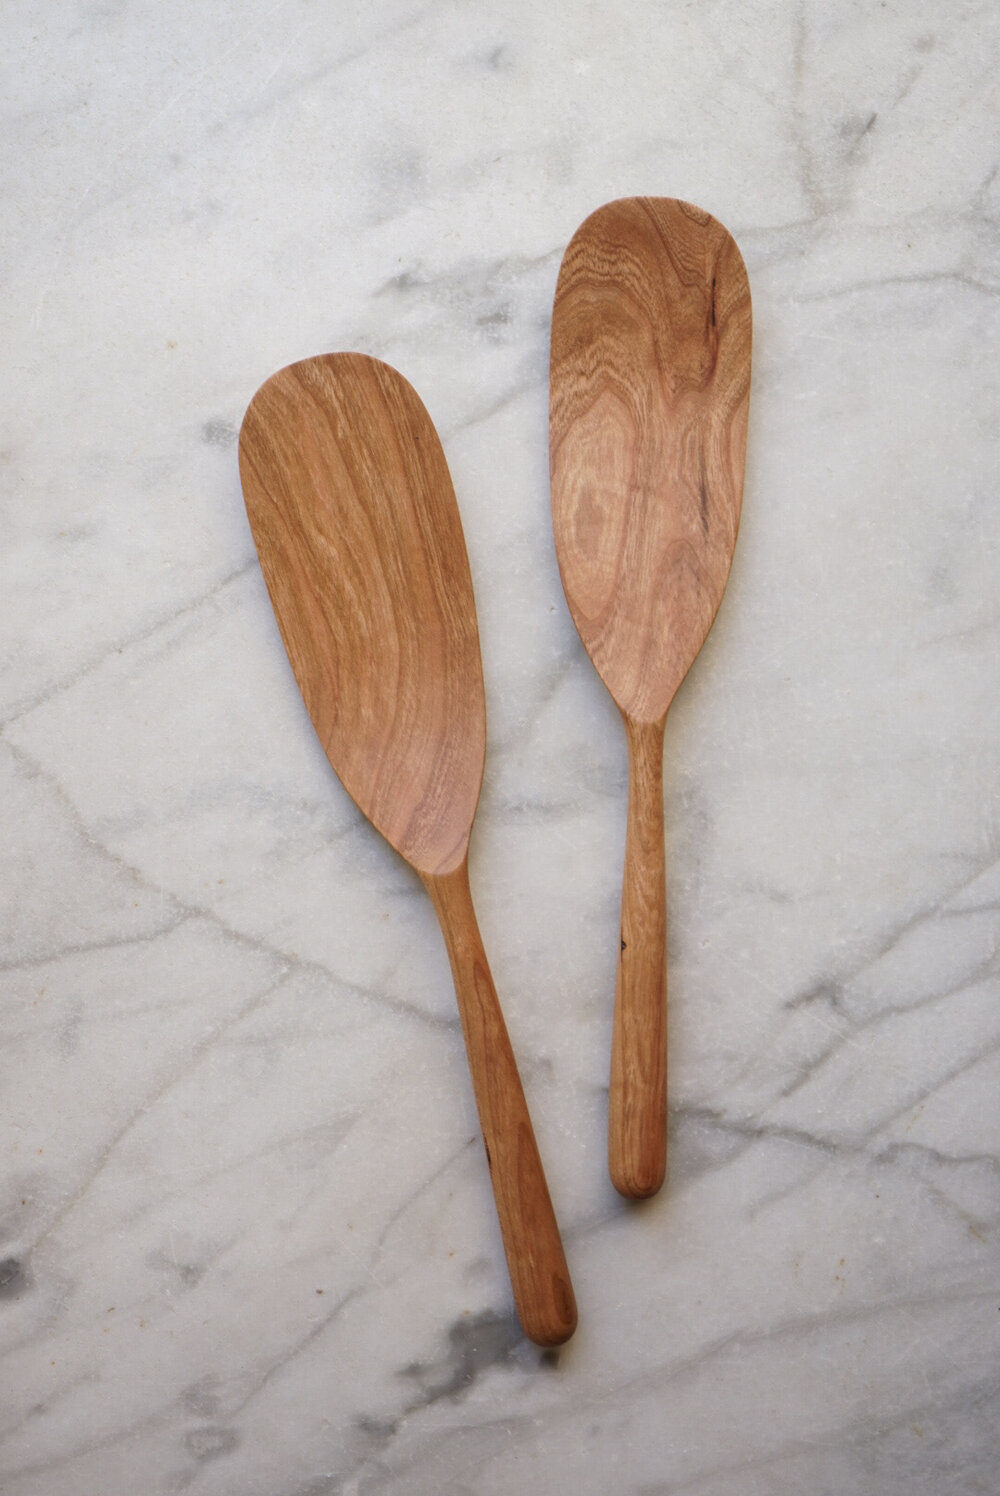 Seven Piece Cherry Wood Cooking Utensil Set by Four Leaf Woodshop